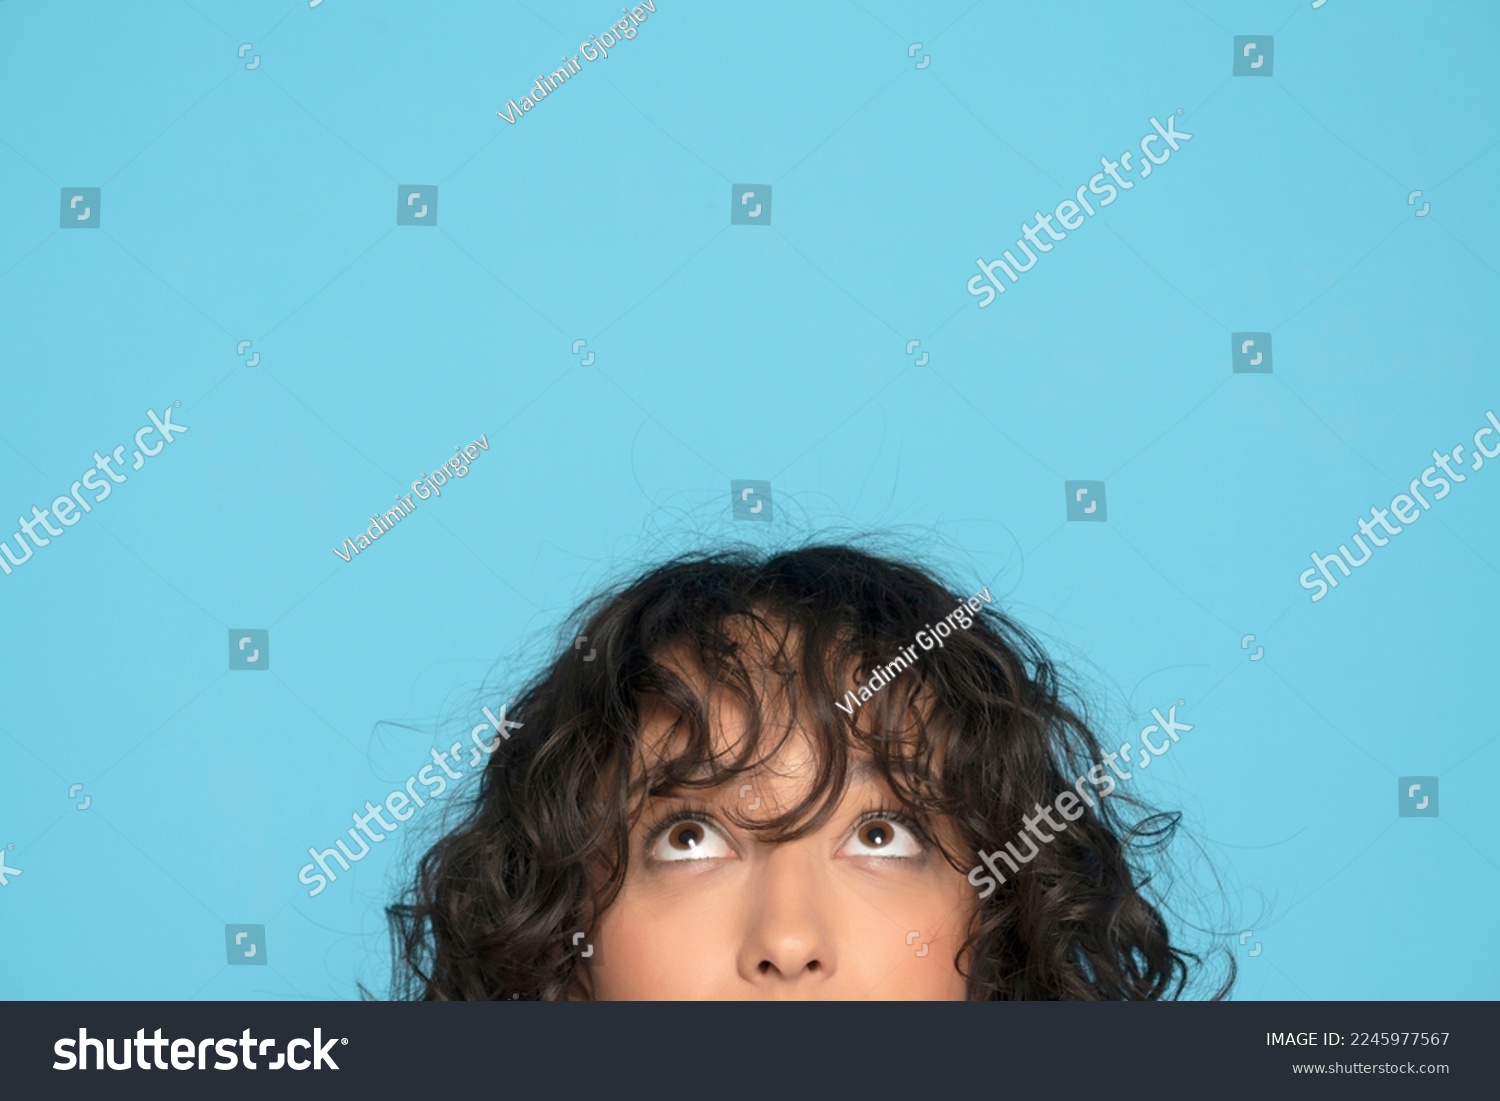 closeup portrait headshot cropped face above lips of cute happy woman looking up isolated on blue studio wall background with copy space above head. #2245977567